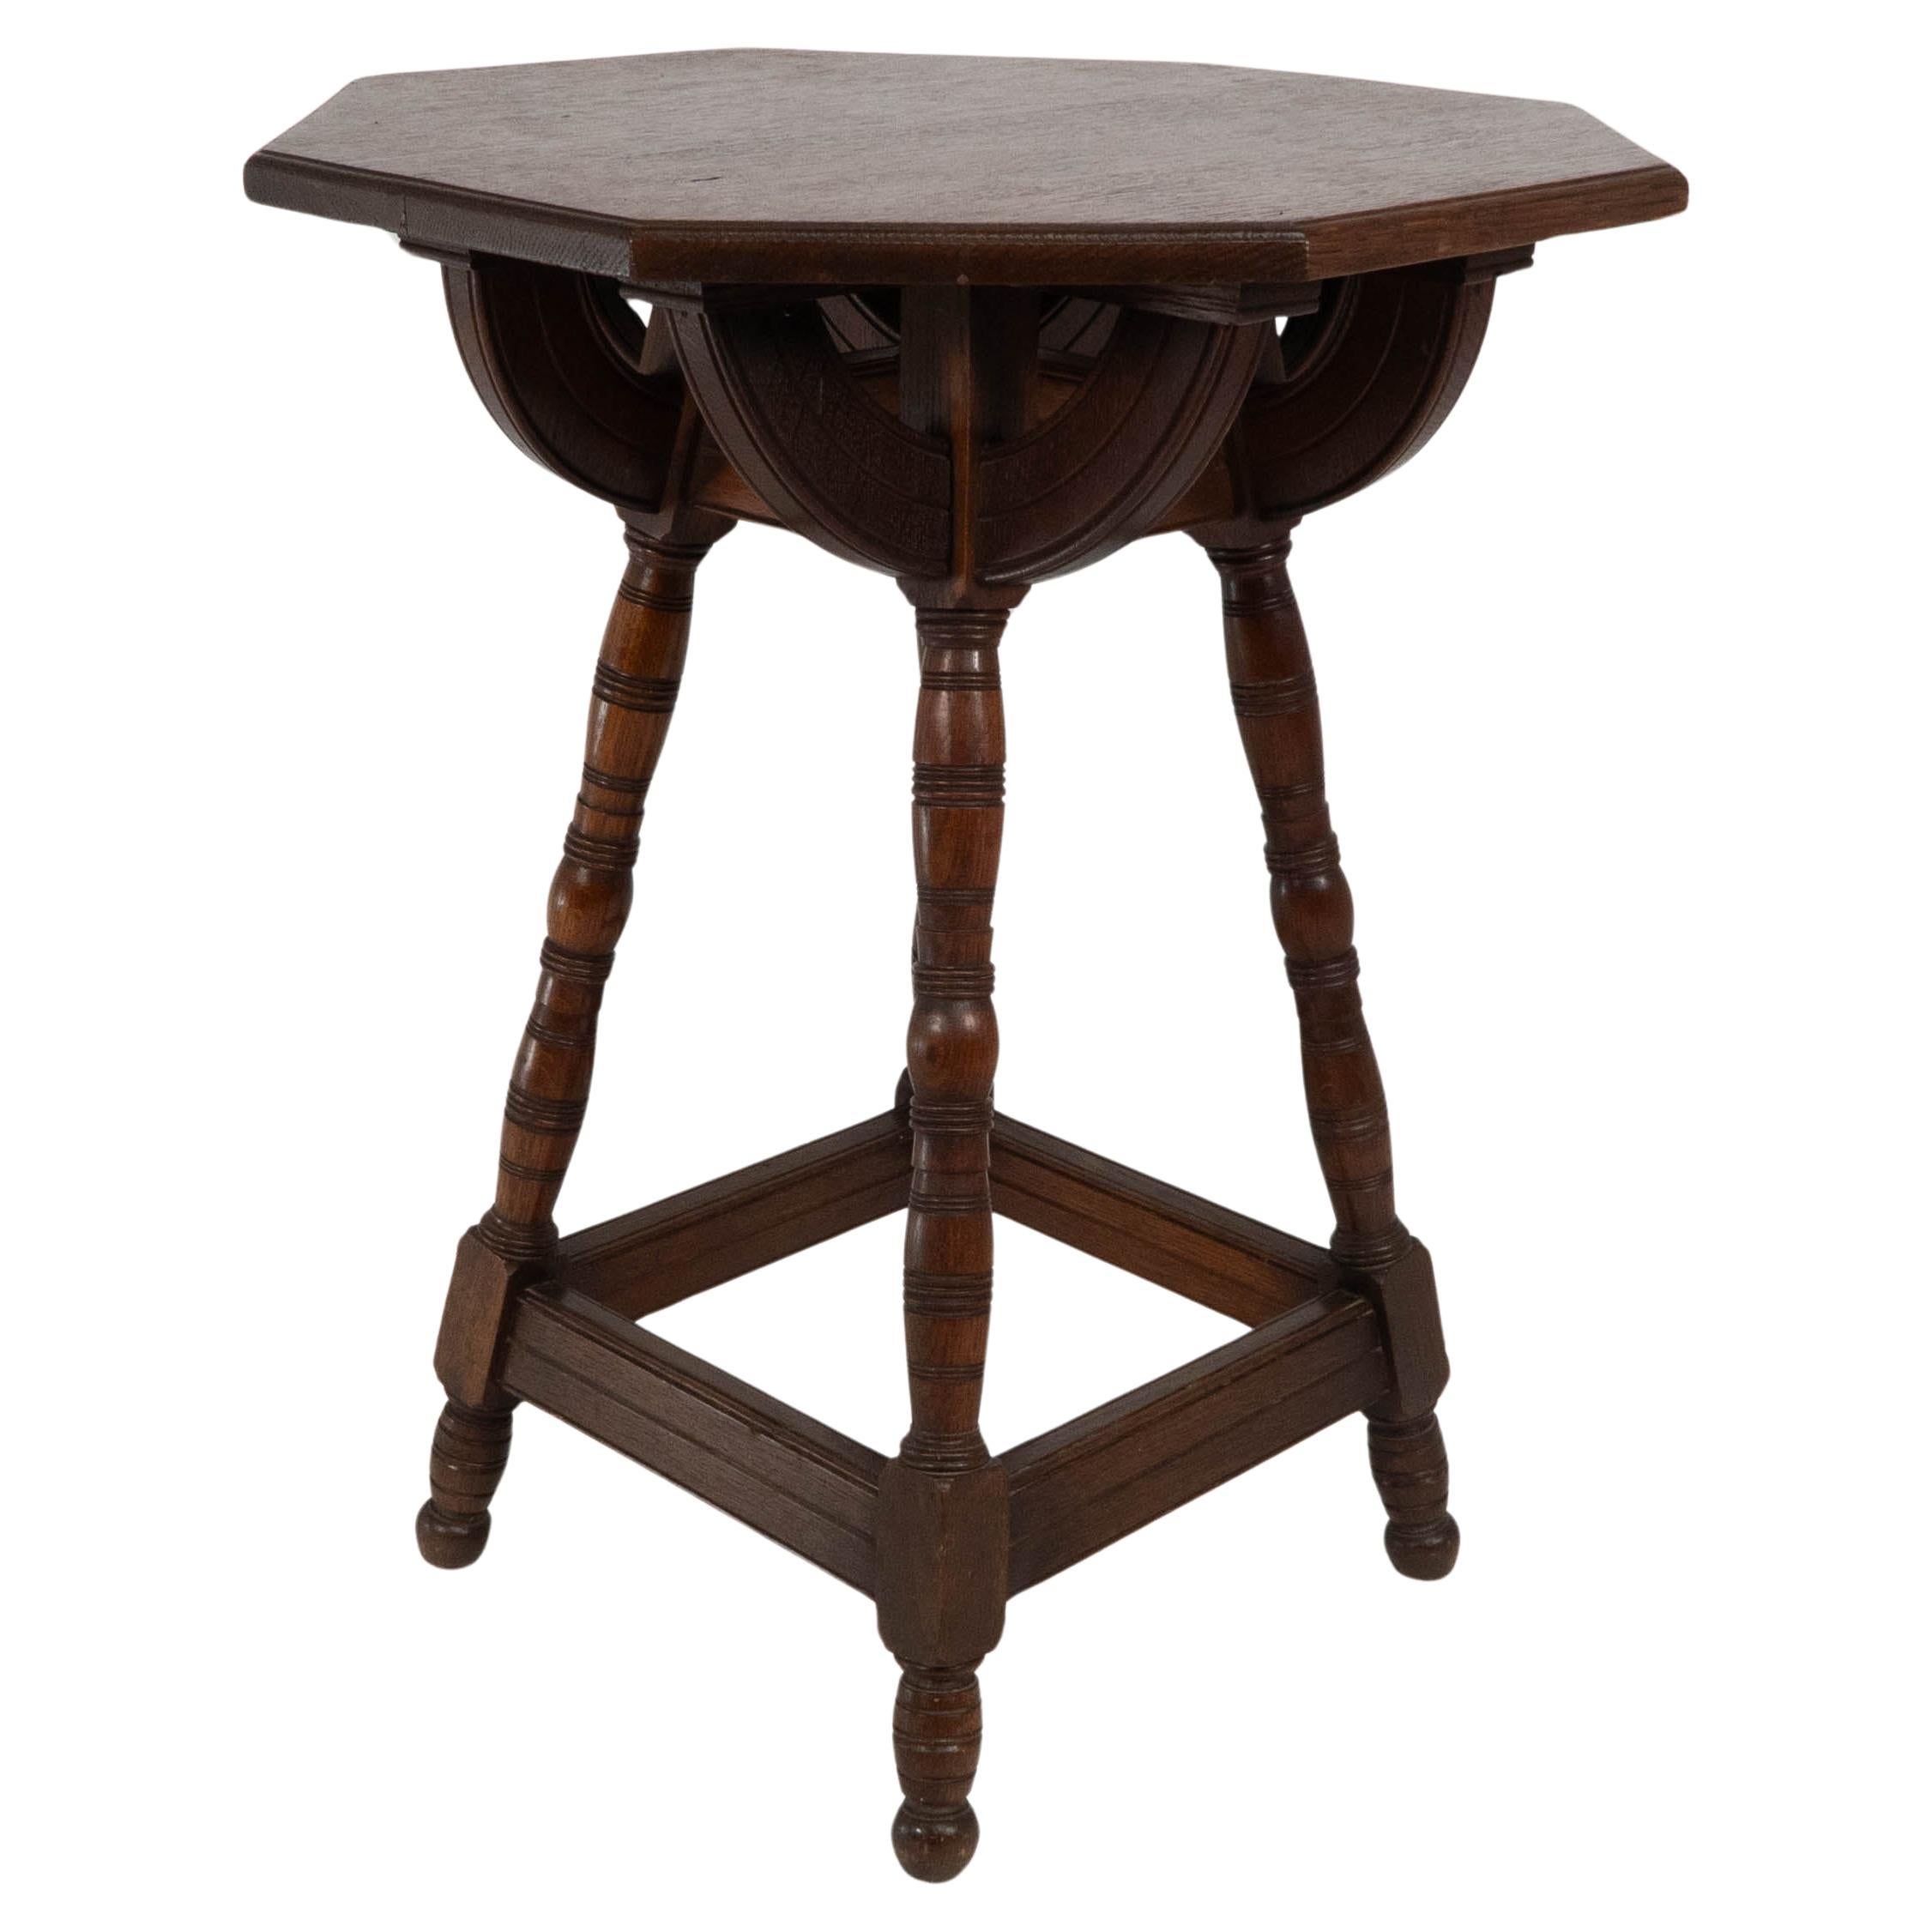 Collier and Plucknett. A rare Gothic Revival oak side table For Sale